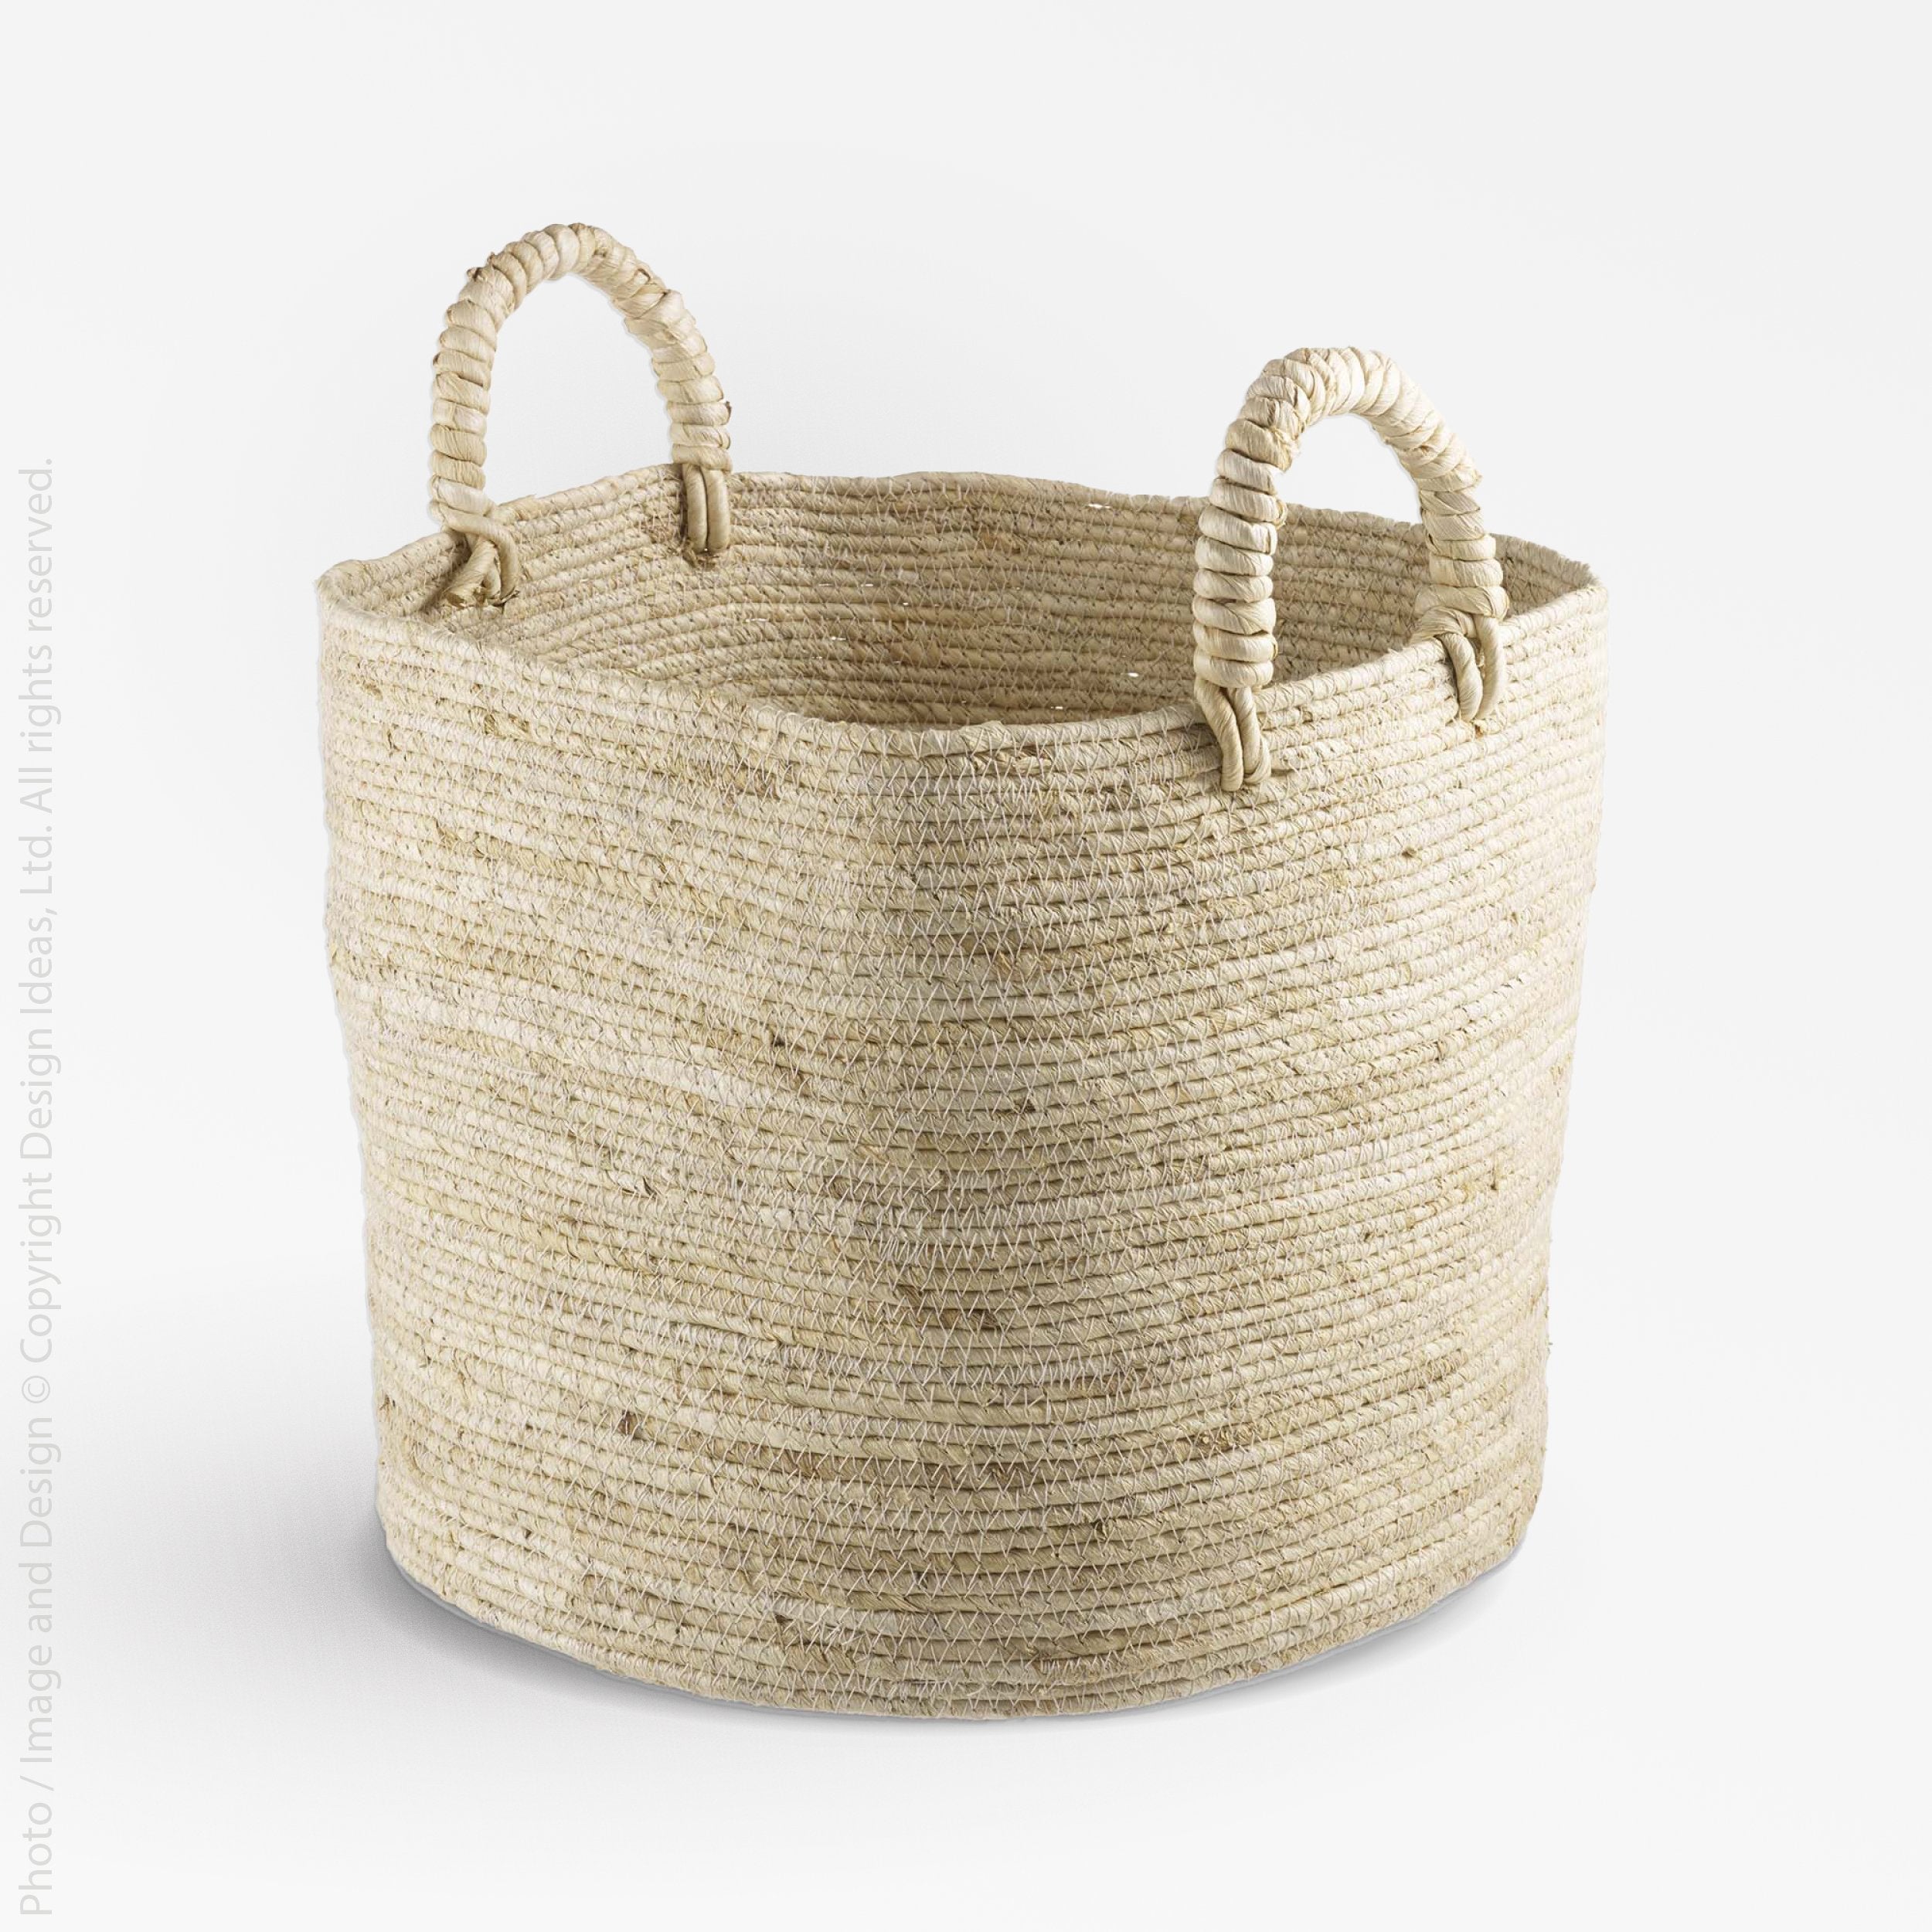 Maiz™ basket (large: handles) - Natural | Image 1 | Premium Basket from the Maiz collection | made with Corn husk for long lasting use | sustainably sourced with recycled materials | texxture